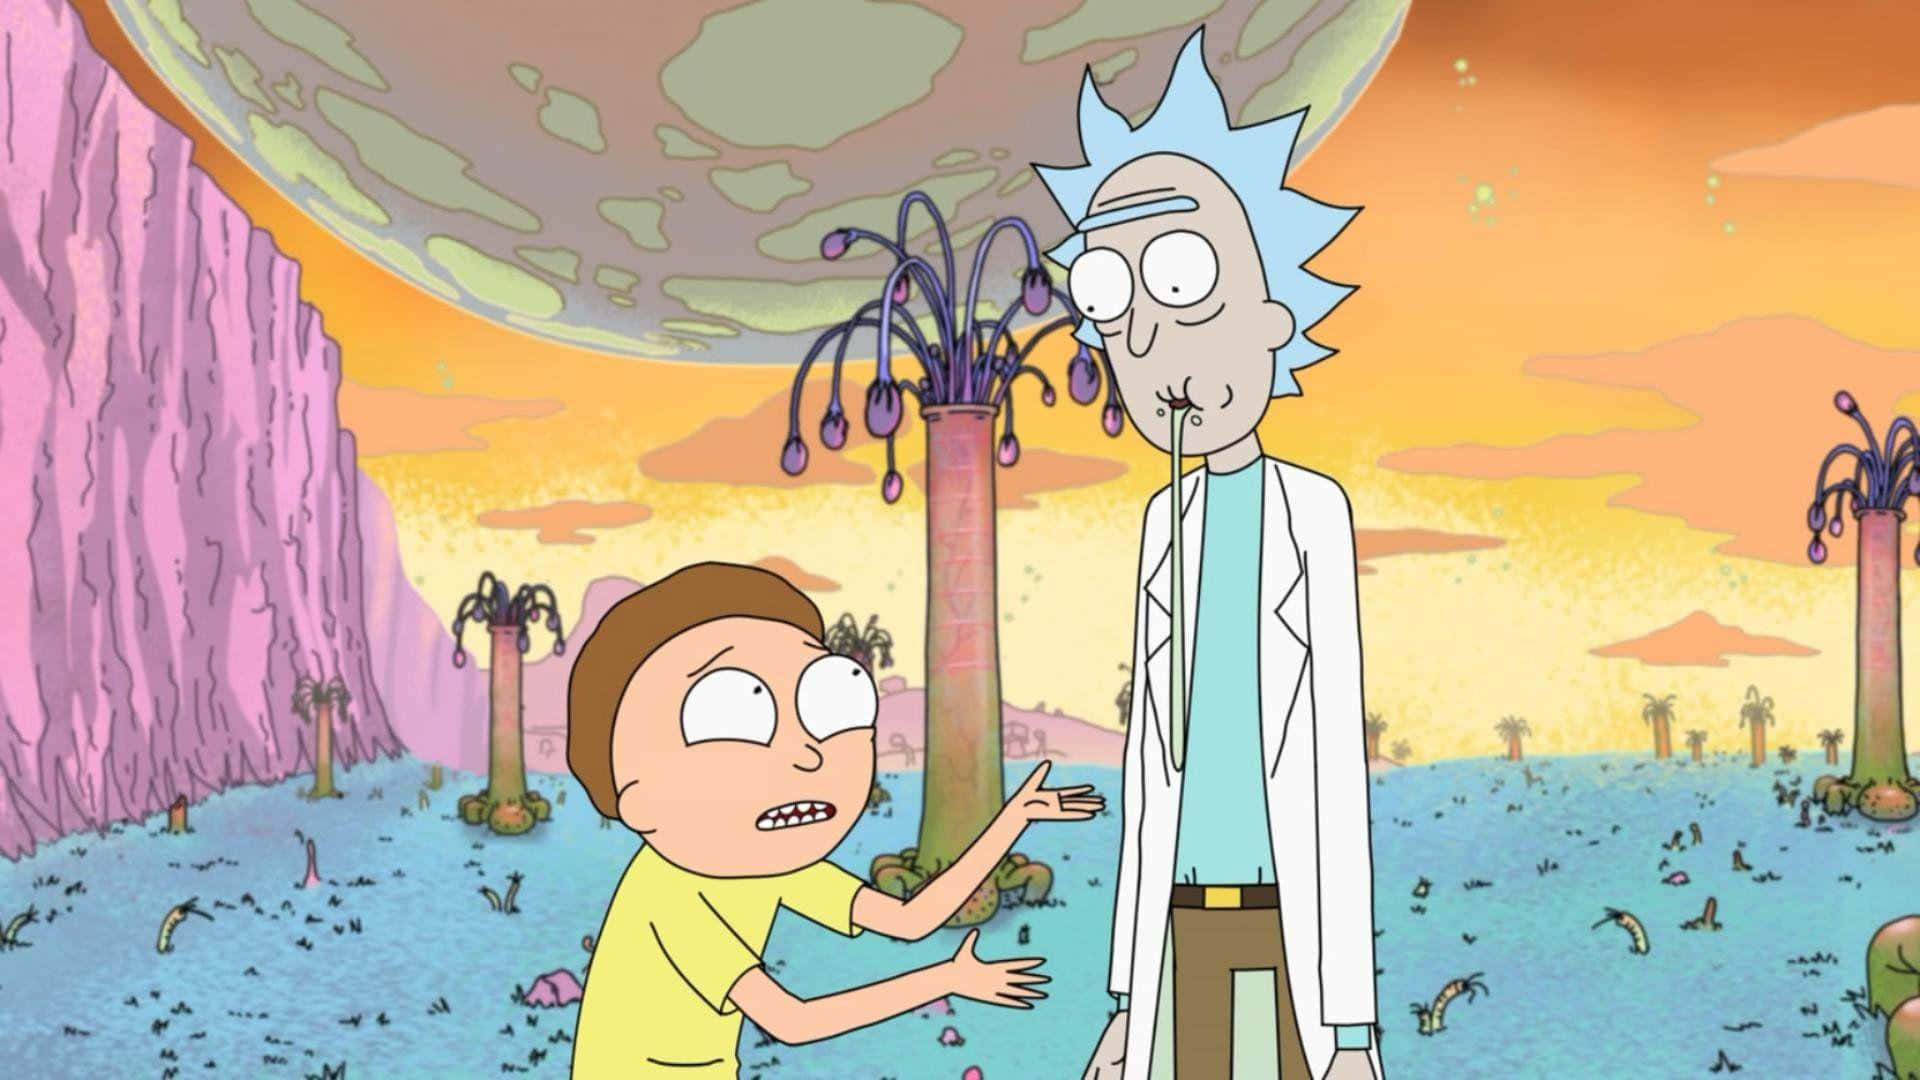 Enjoy killer visuals with Rick and Morty's themed MacBook Wallpaper